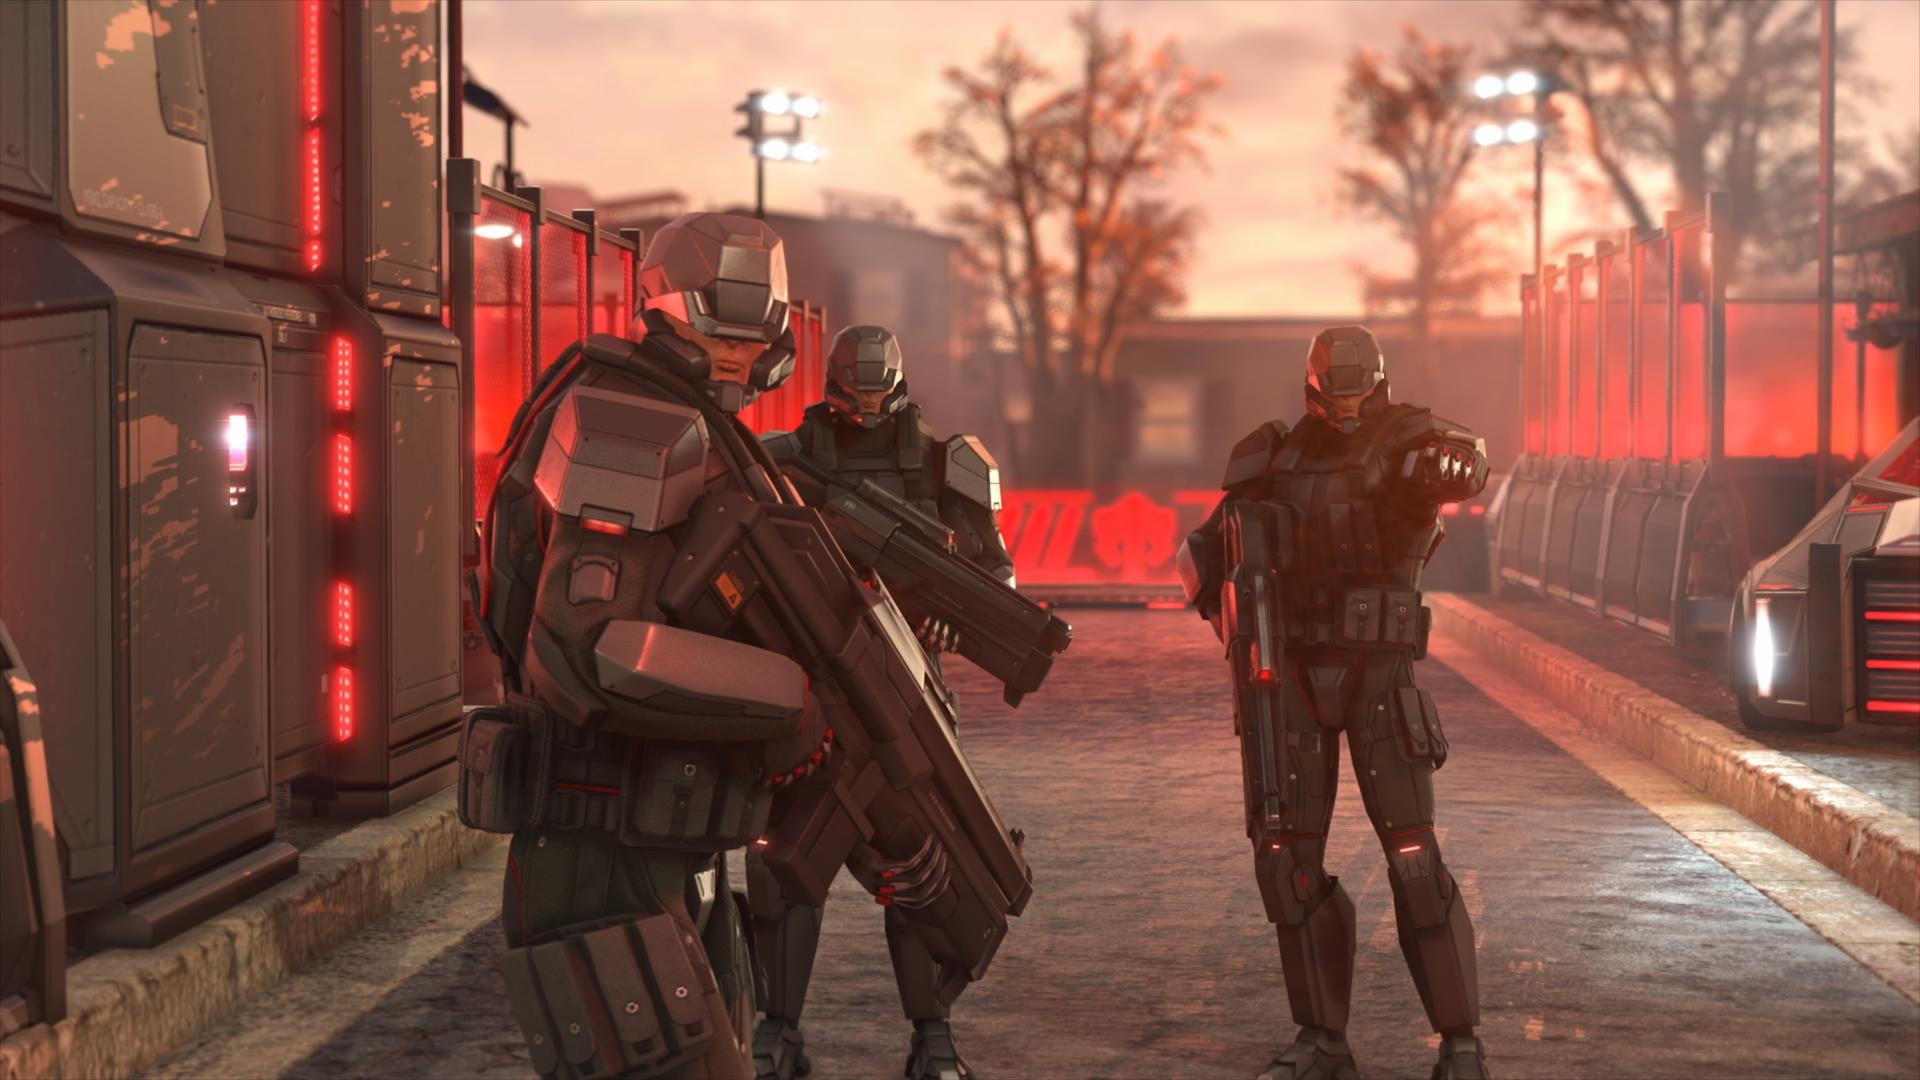 XCOM 2 is free on the Epic Games Store, but the deal ends next week